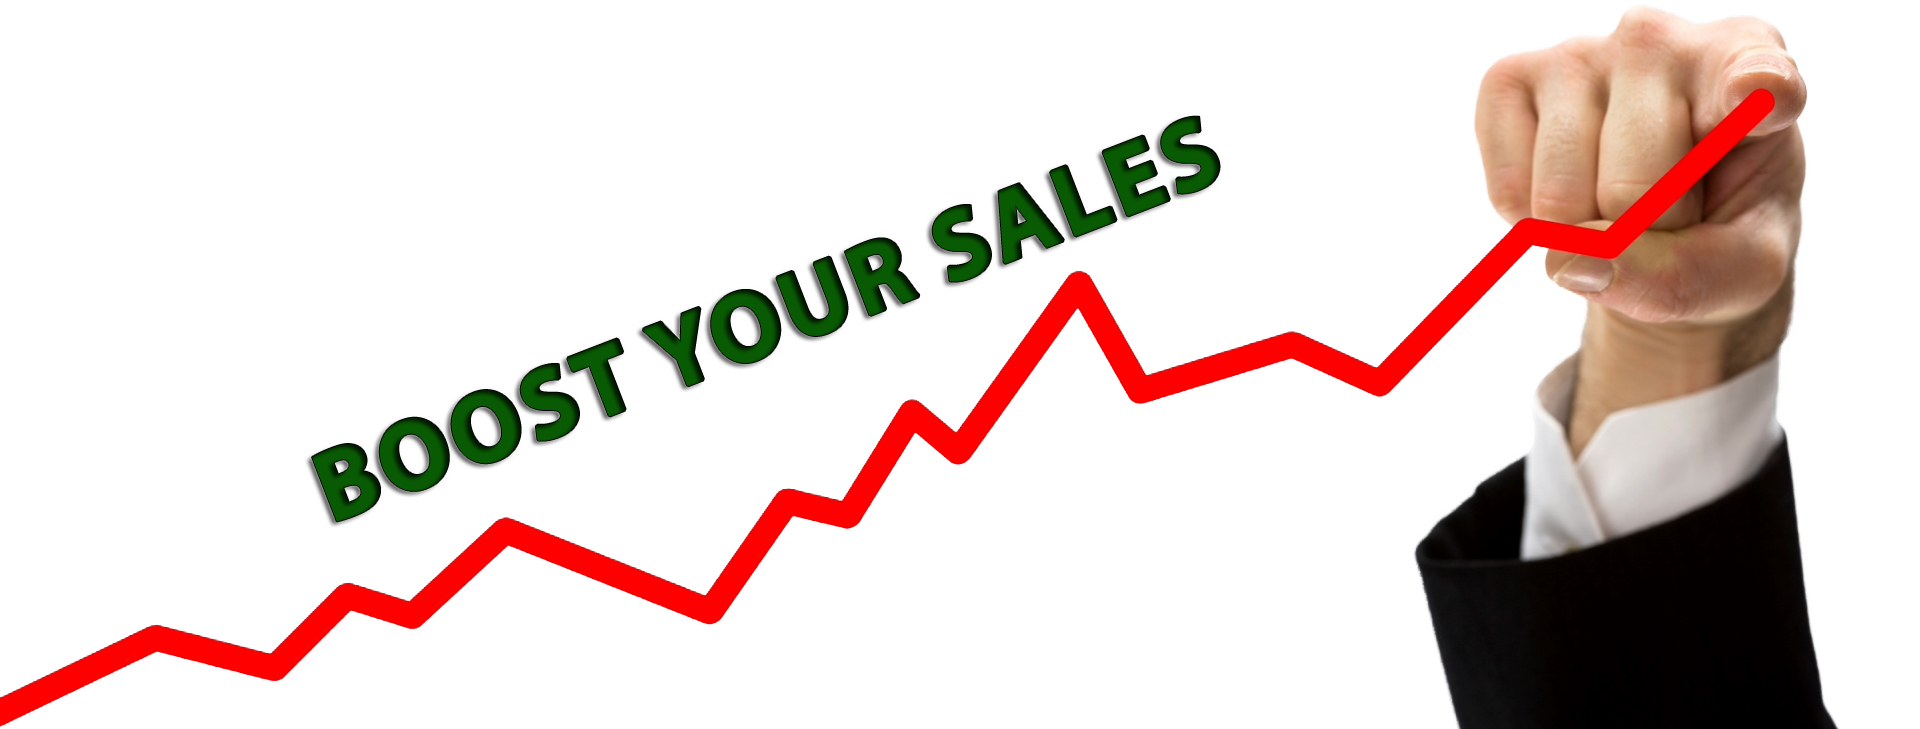 SALES LEADERSHIP AND COACHING TO BOOST THE SALES